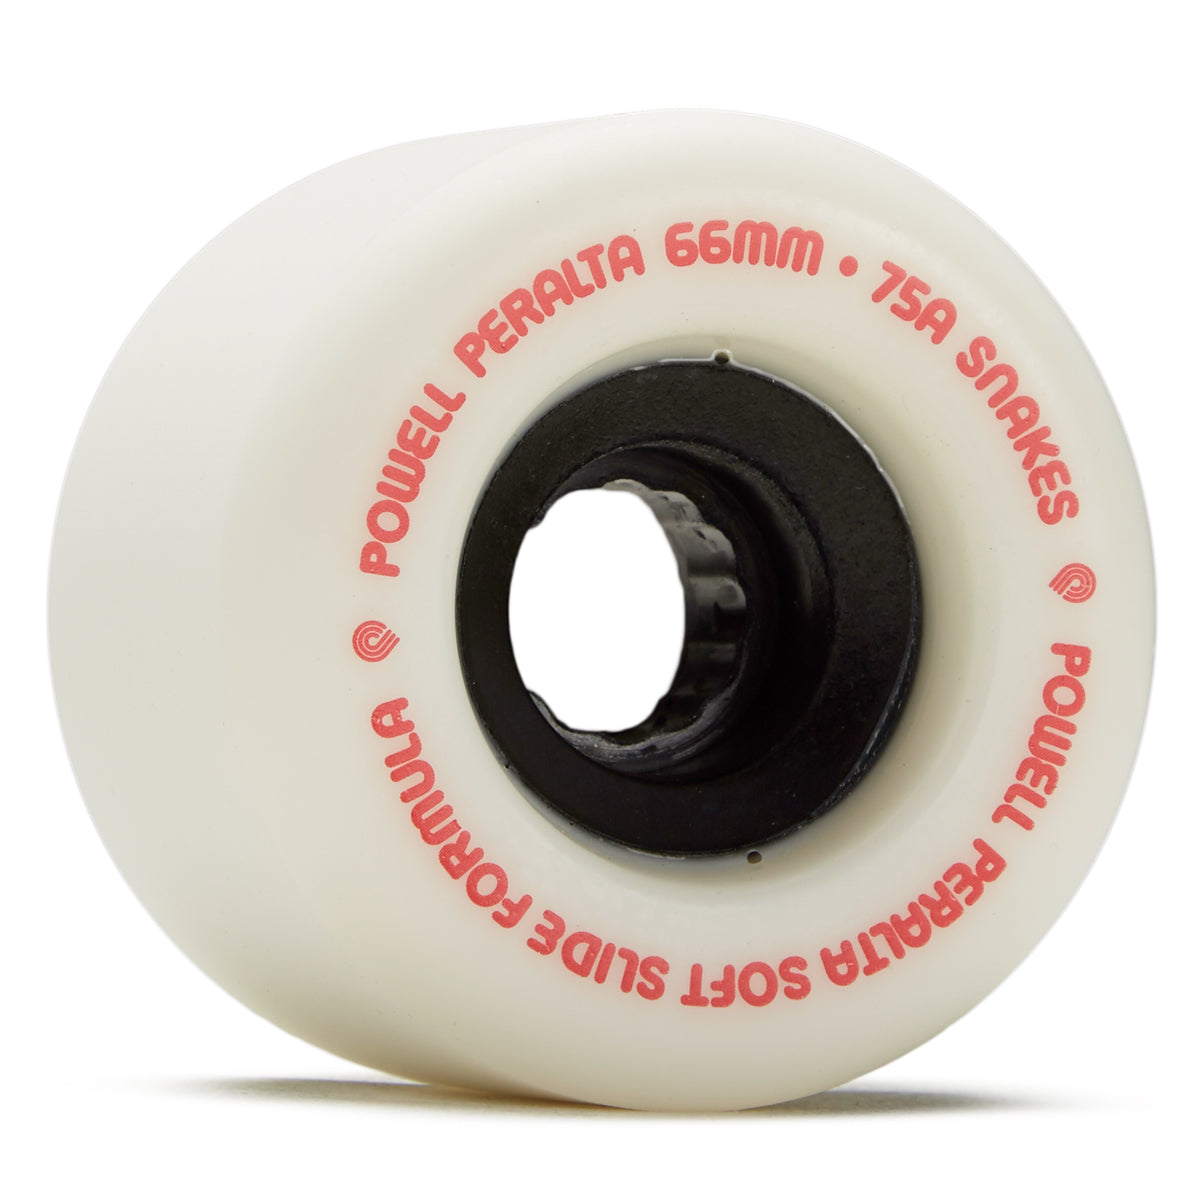 Powell-Peralta Snakes 75A Longboard Wheels - White - 66mm